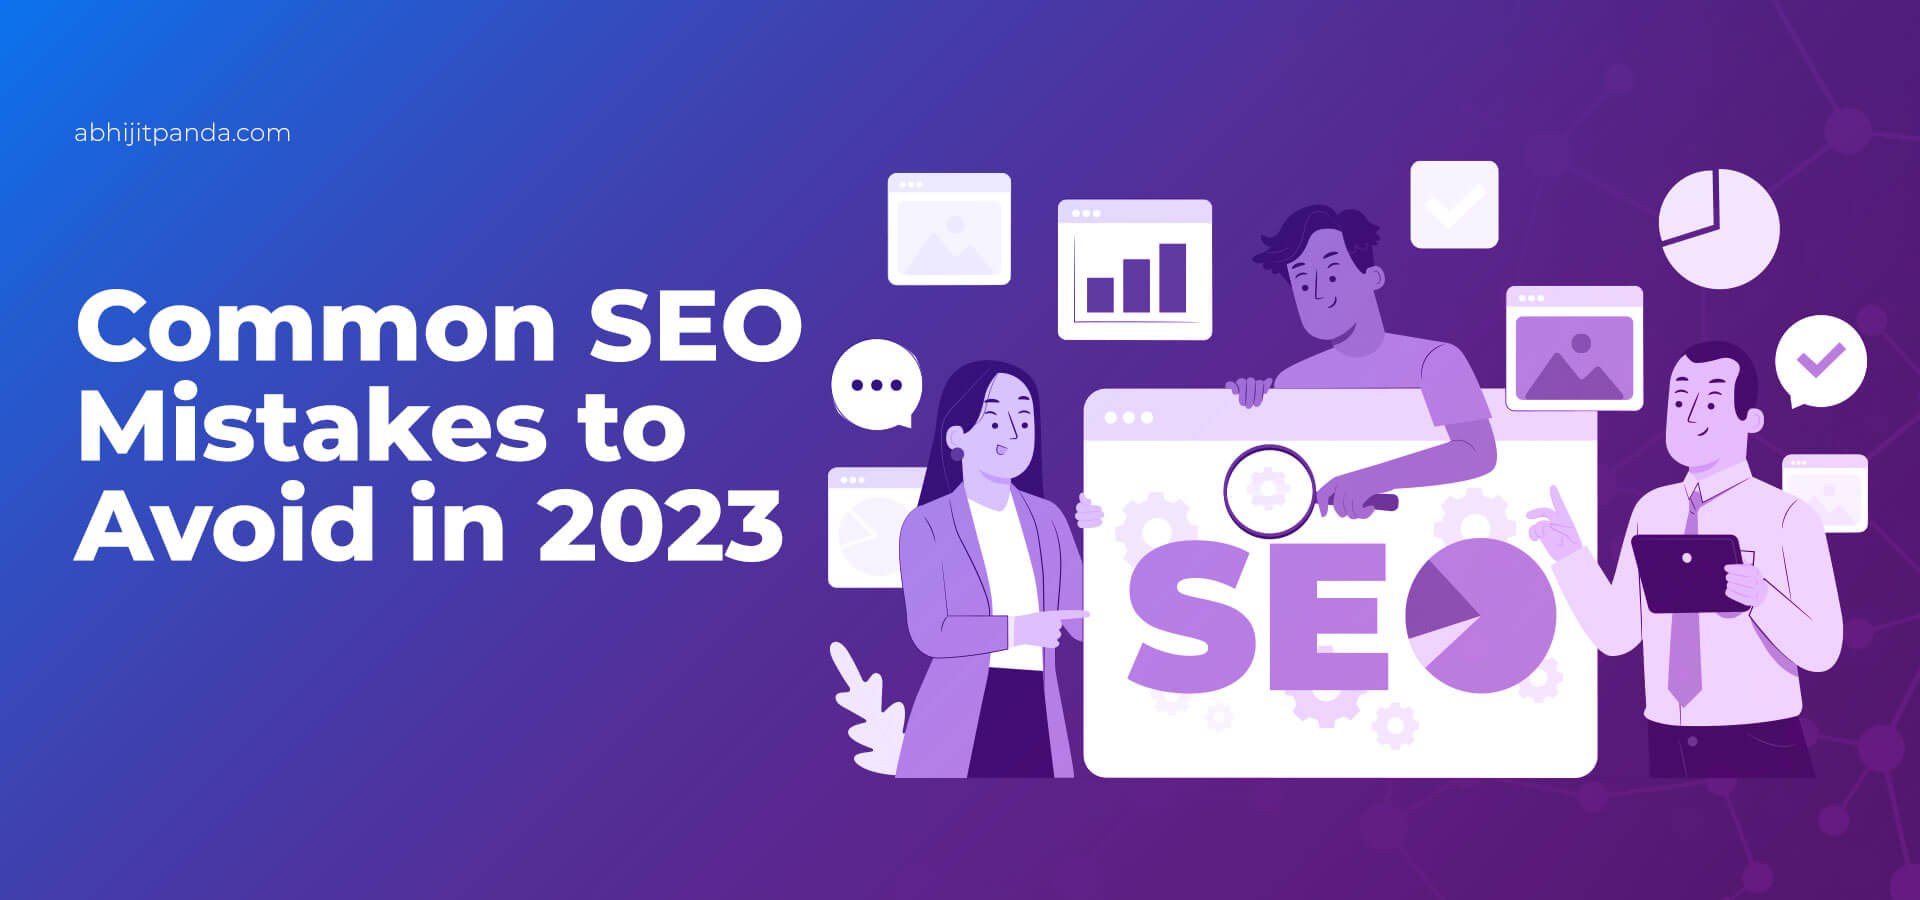 Common SEO Mistakes to Avoid in 2023